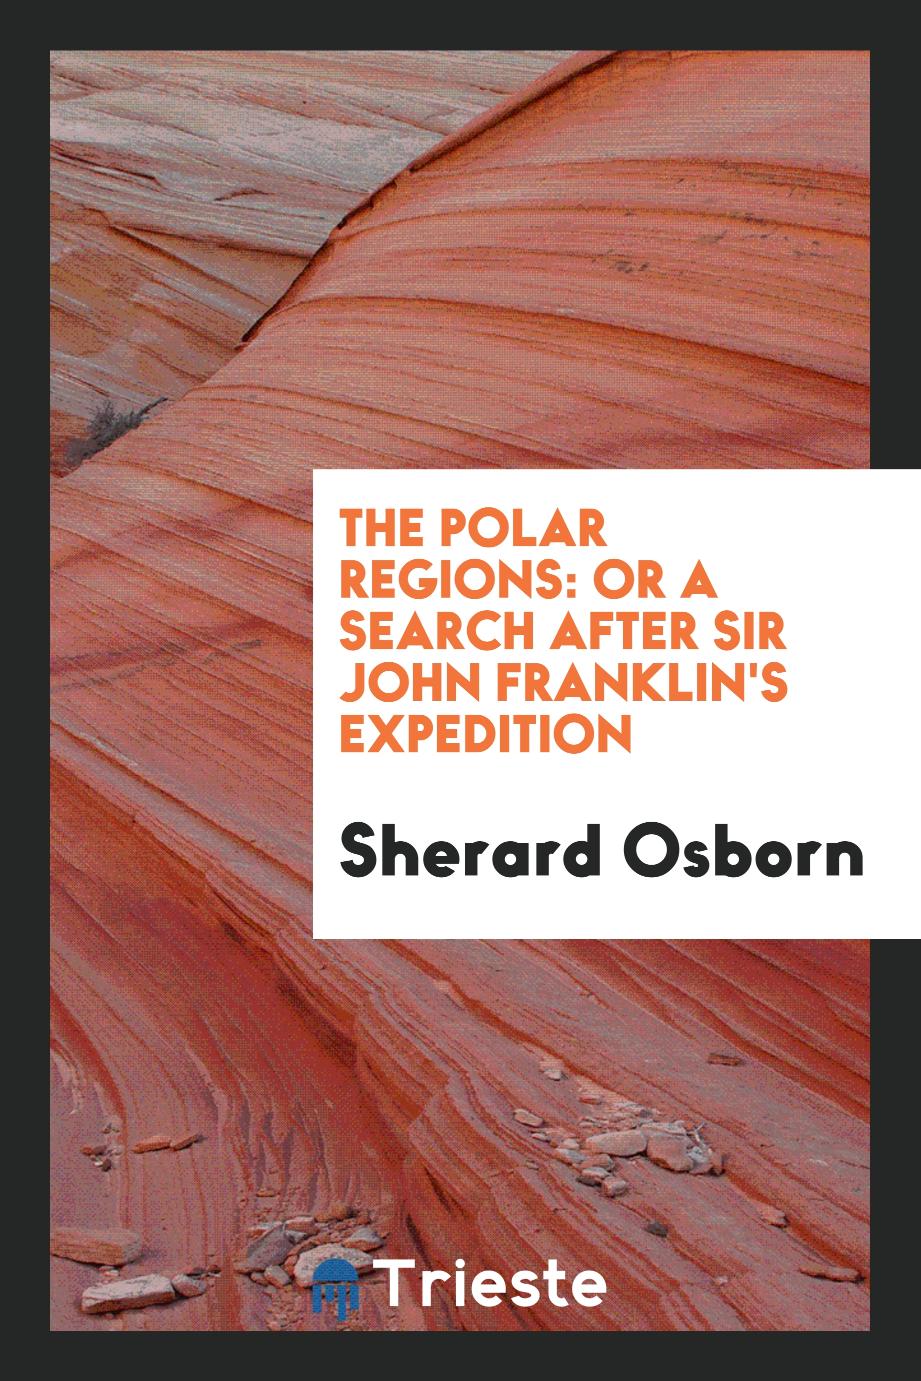 The Polar regions: or a search after Sir John Franklin's expedition